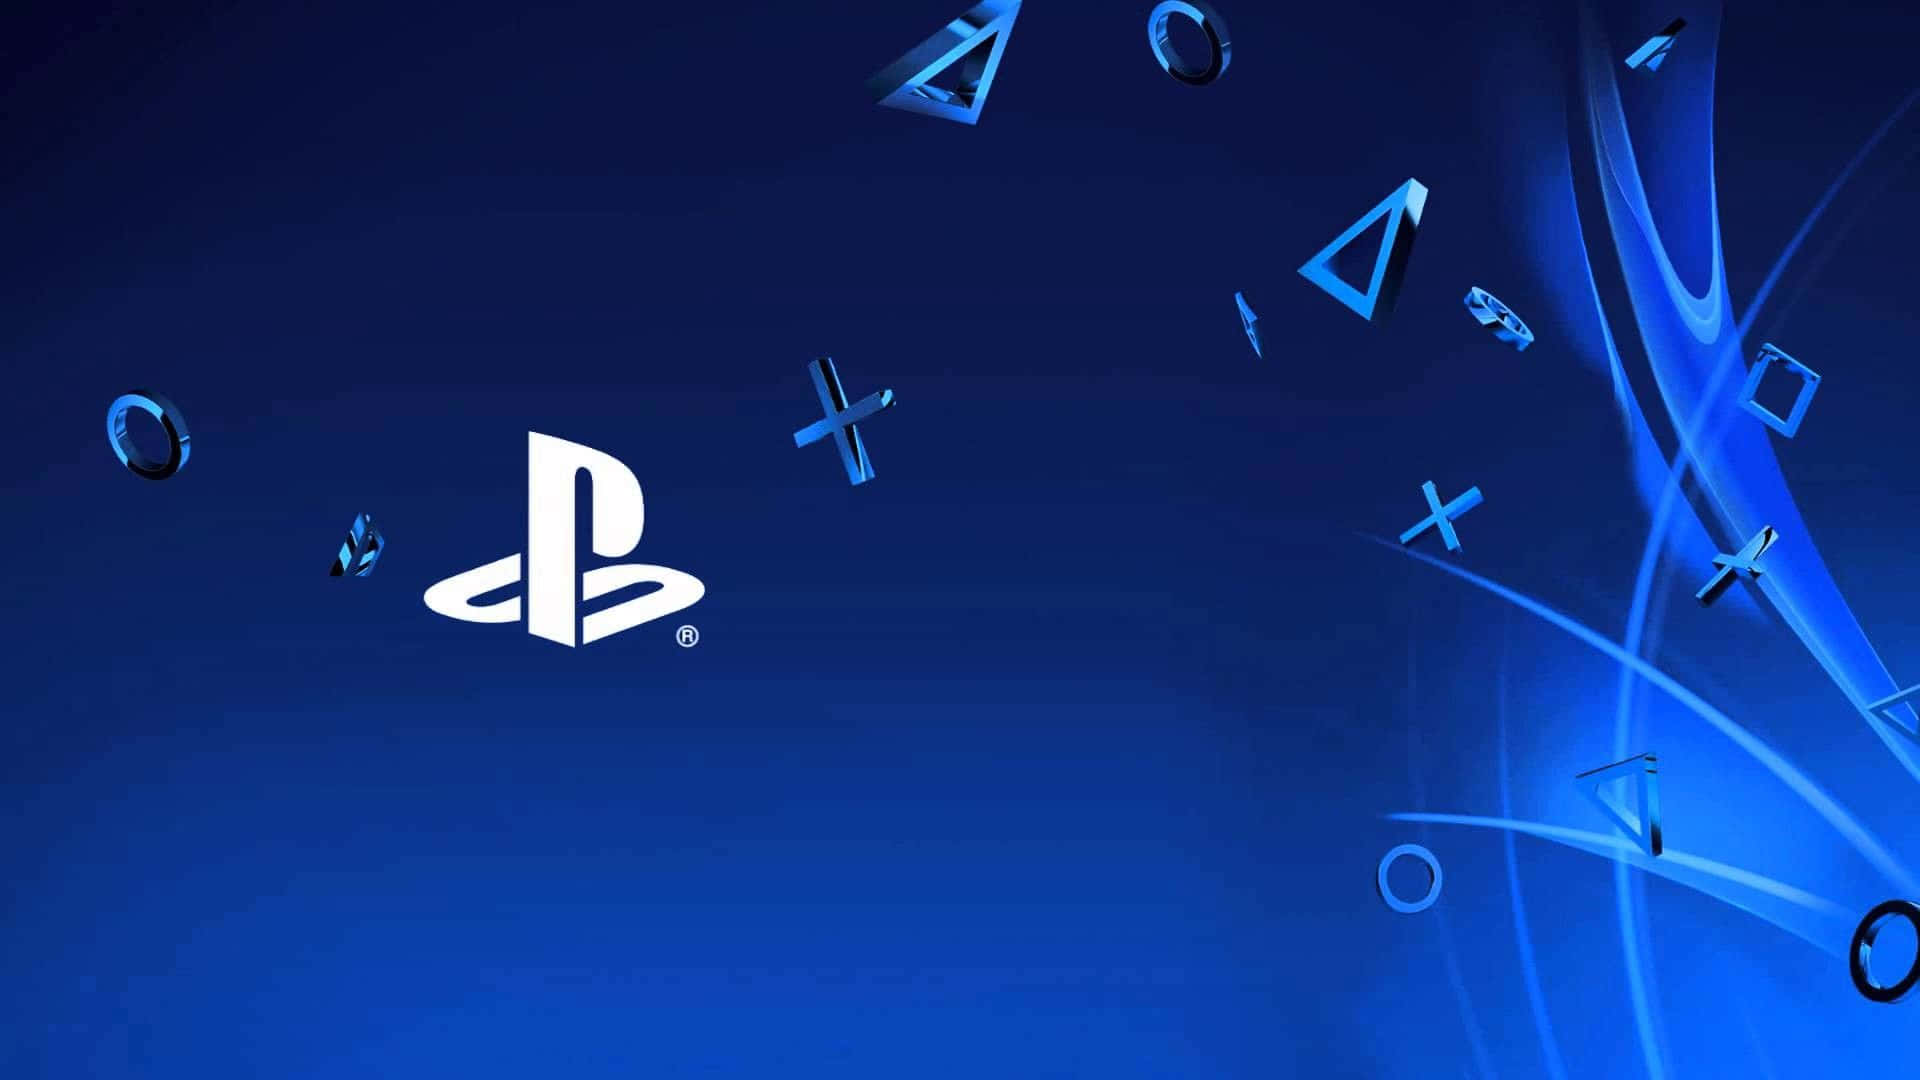 Default Cool Ps4 With Floating Controller Icons Background